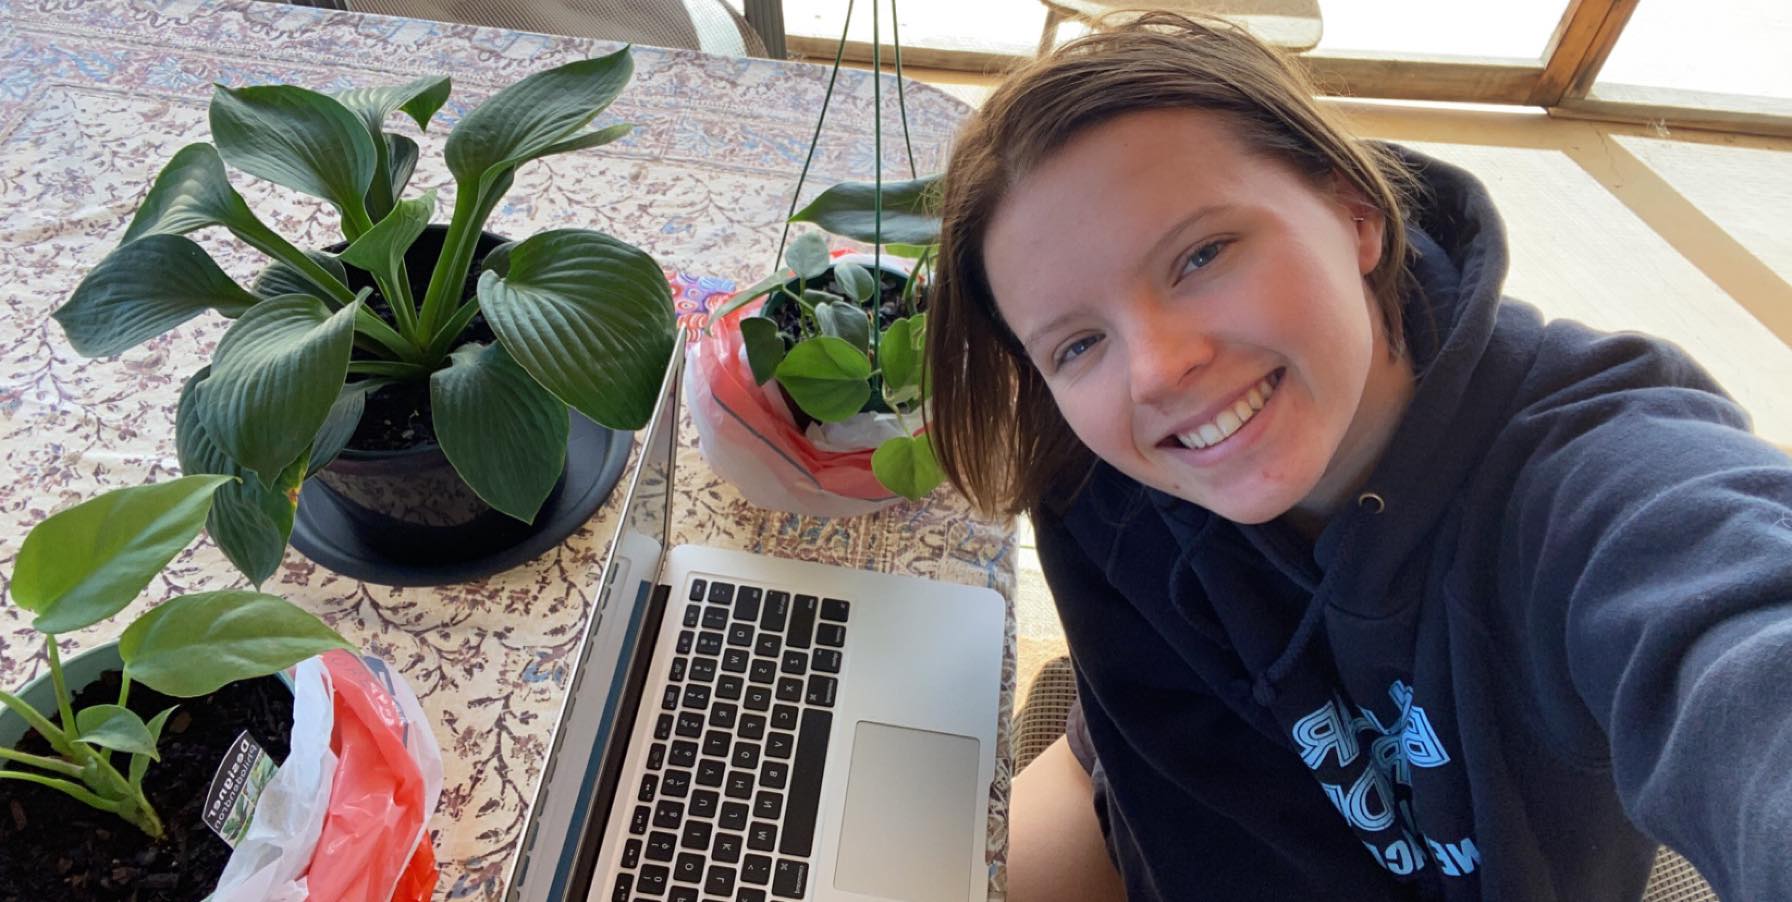 Julia taking a selfie in front of computer with plants.